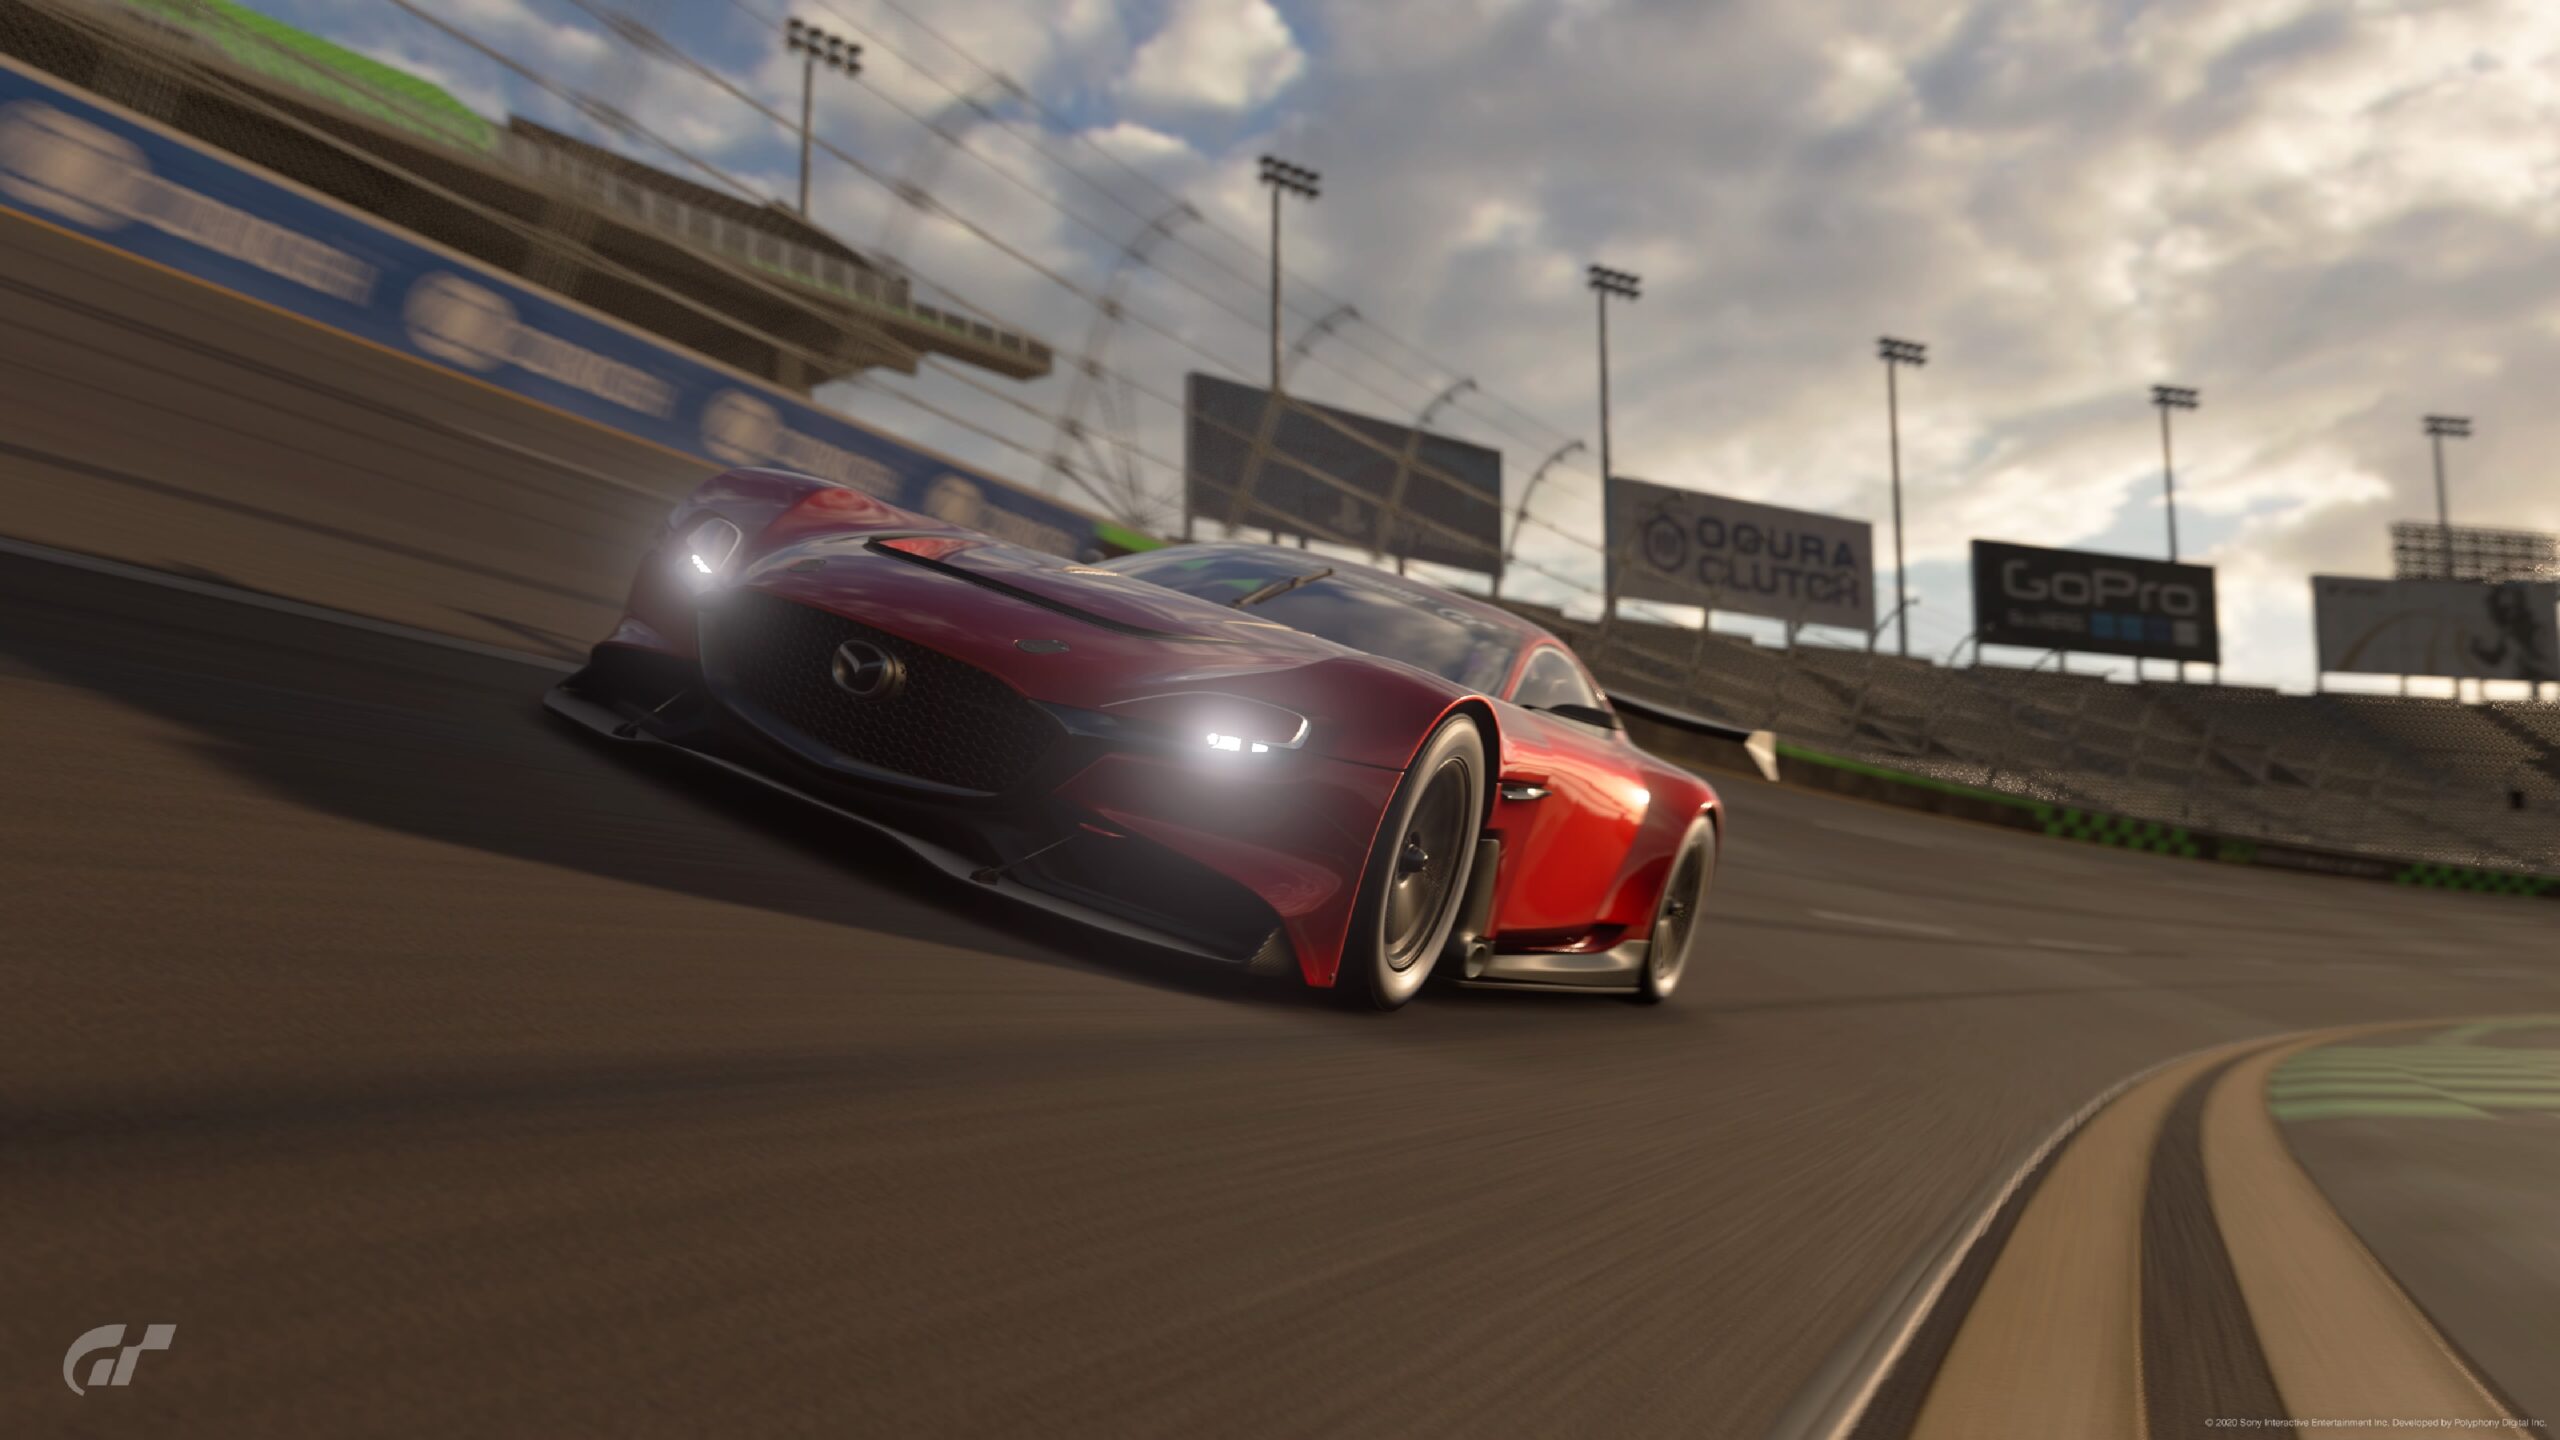 [Top 10] Racing Games with the Most Realistic Graphics GAMERS DECIDE